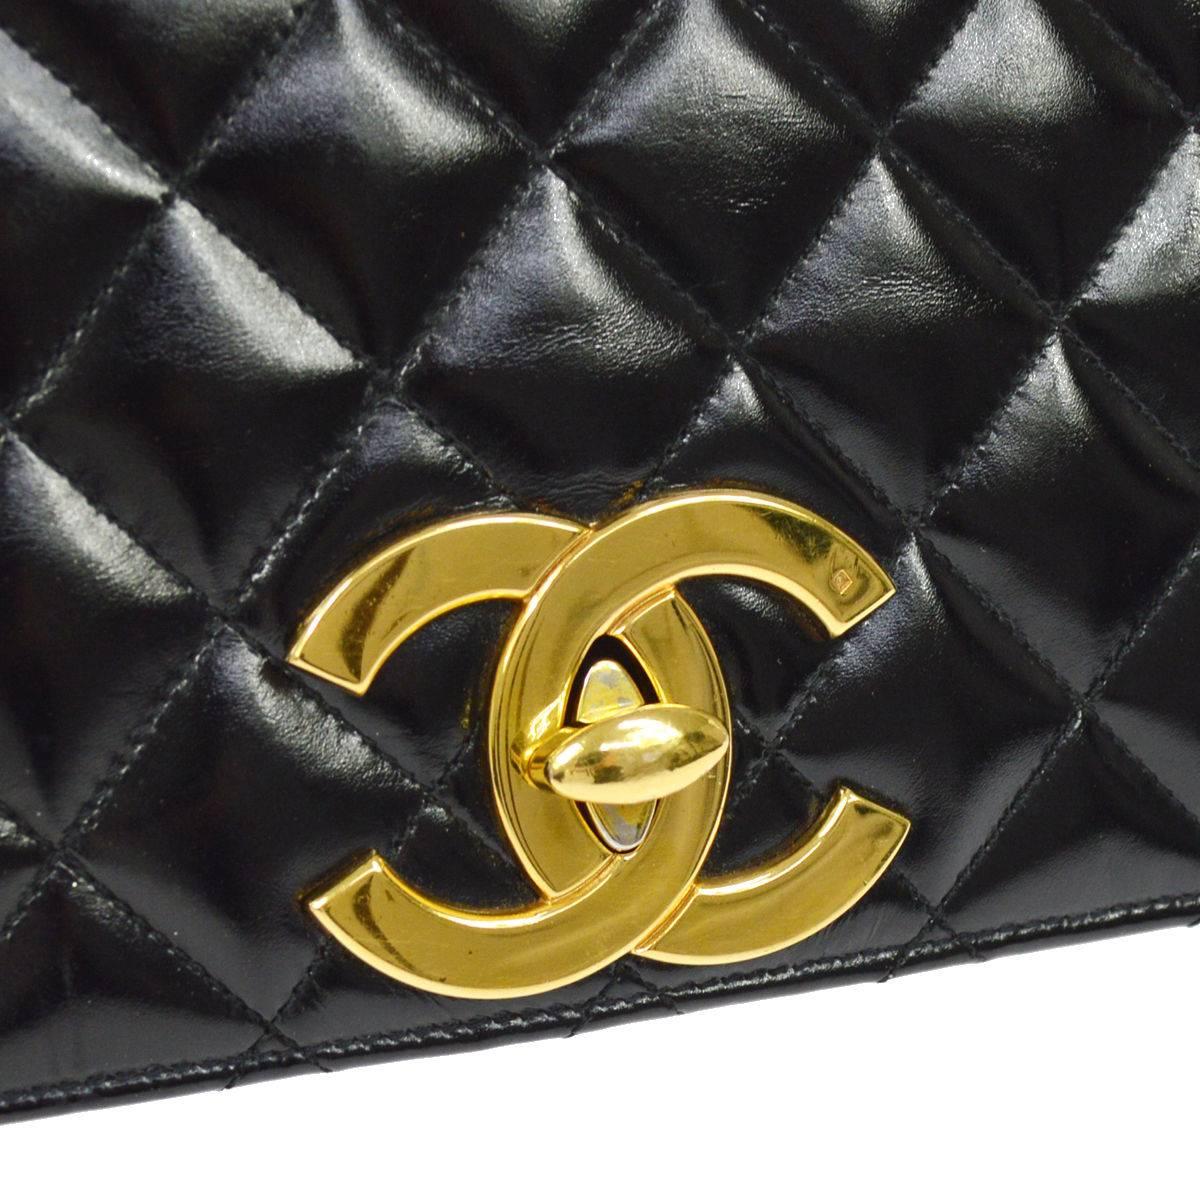 CURATOR'S NOTES

Chanel Vintage Rare Black Gold CC Charm Evening Small Flap Shoulder Bag  

Lambskin leather
Gold tone hardware
Turnlock closure
Leather interior
Date code
Made in France
Shoulder strap drop 20"
Measures 8.75" W x ×